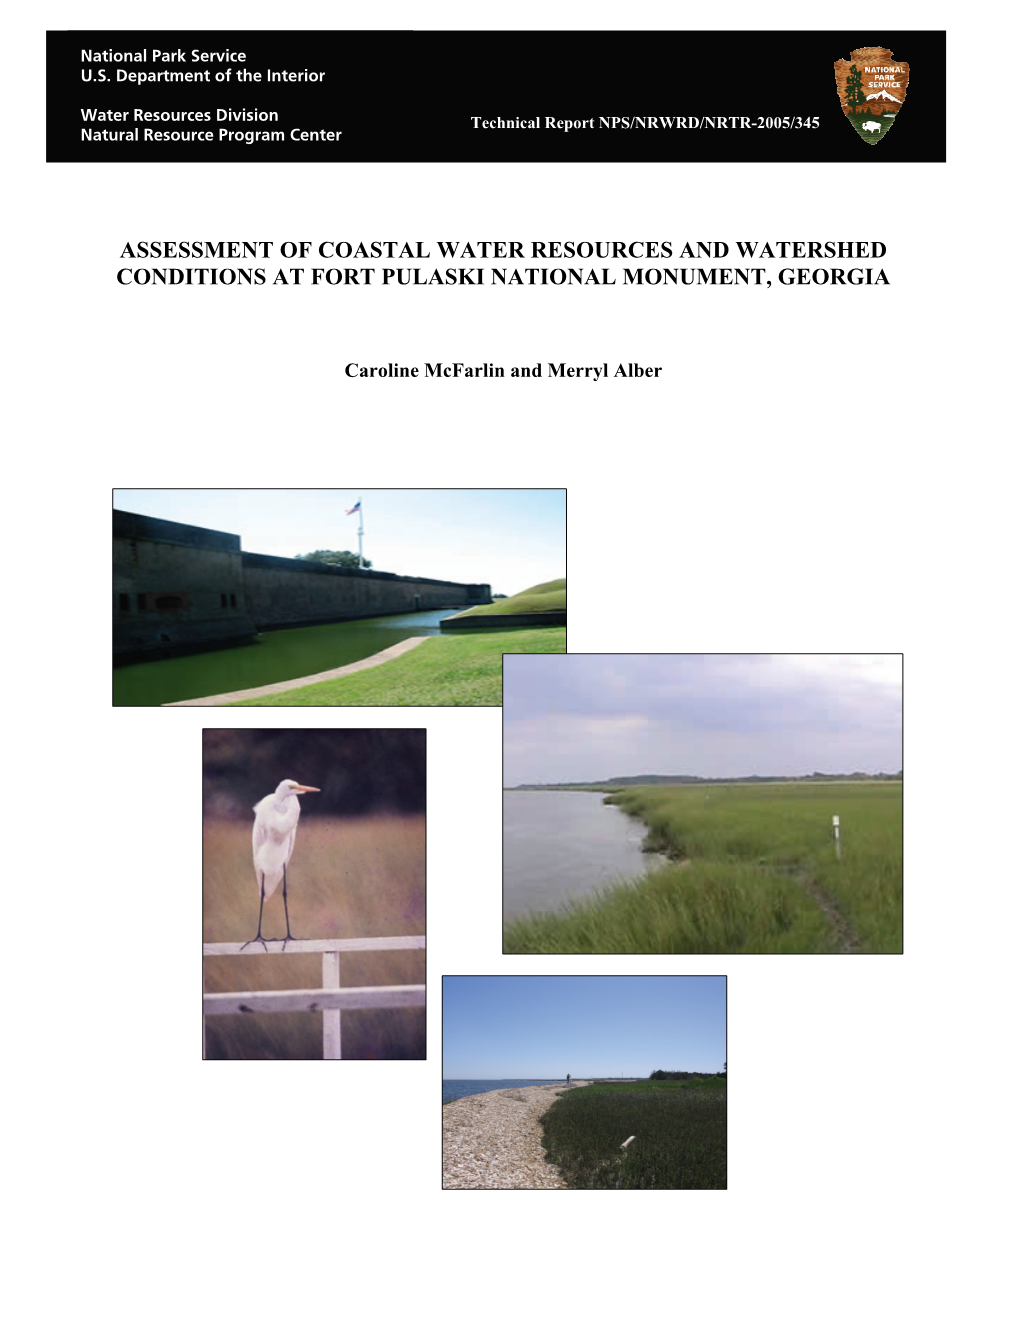 Assessment of Coastal Water Resources and Watershed Conditions at Fort Pulaski National Monument, Georgia